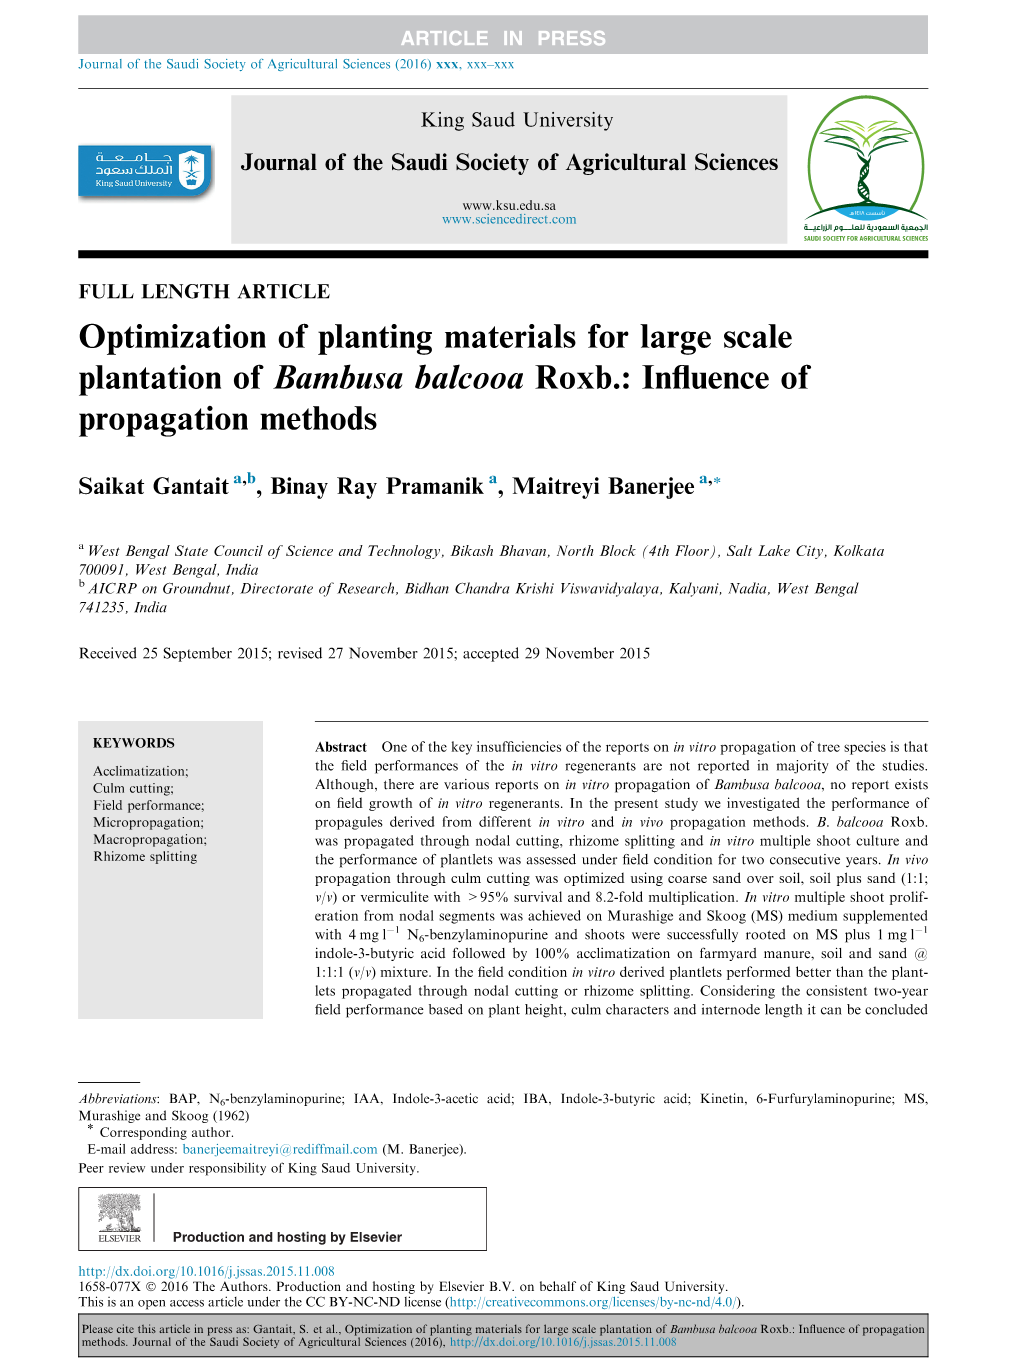 Optimization of Planting Materials for Large Scale Plantation of Bambusa Balcooa Roxb.: Inﬂuence of Propagation Methods